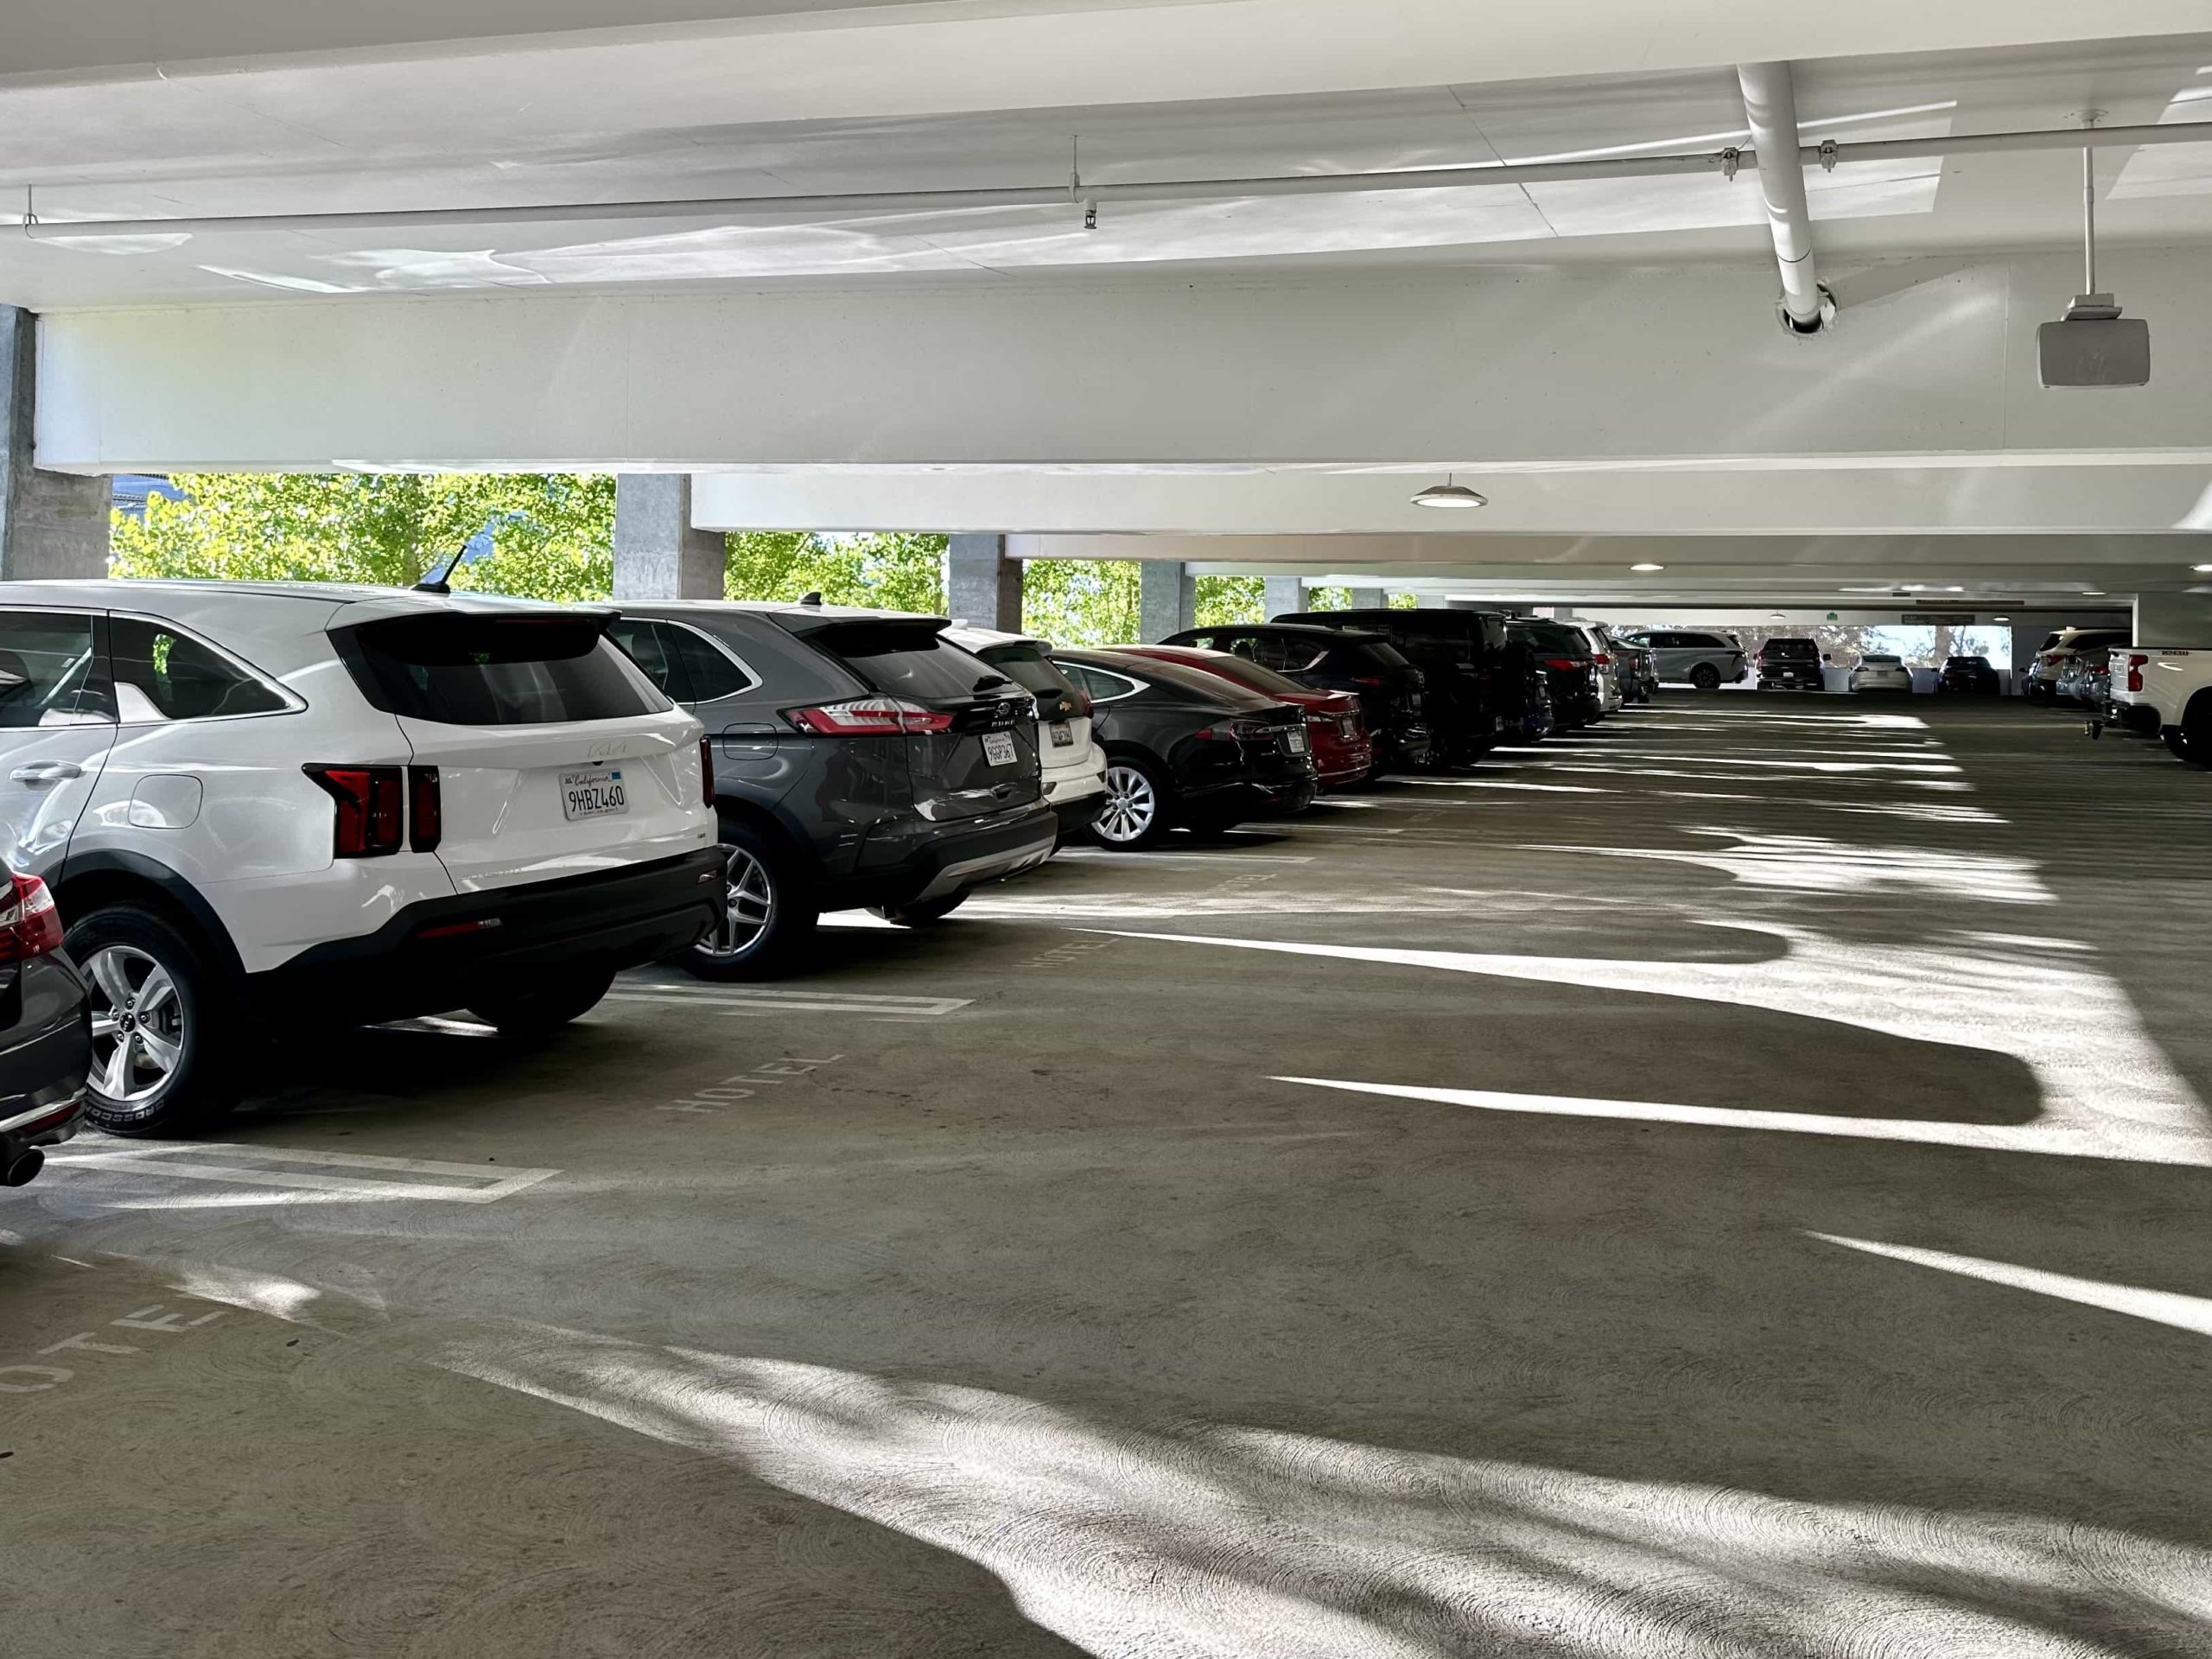 Cars parked within the ground floor of a large parking garage